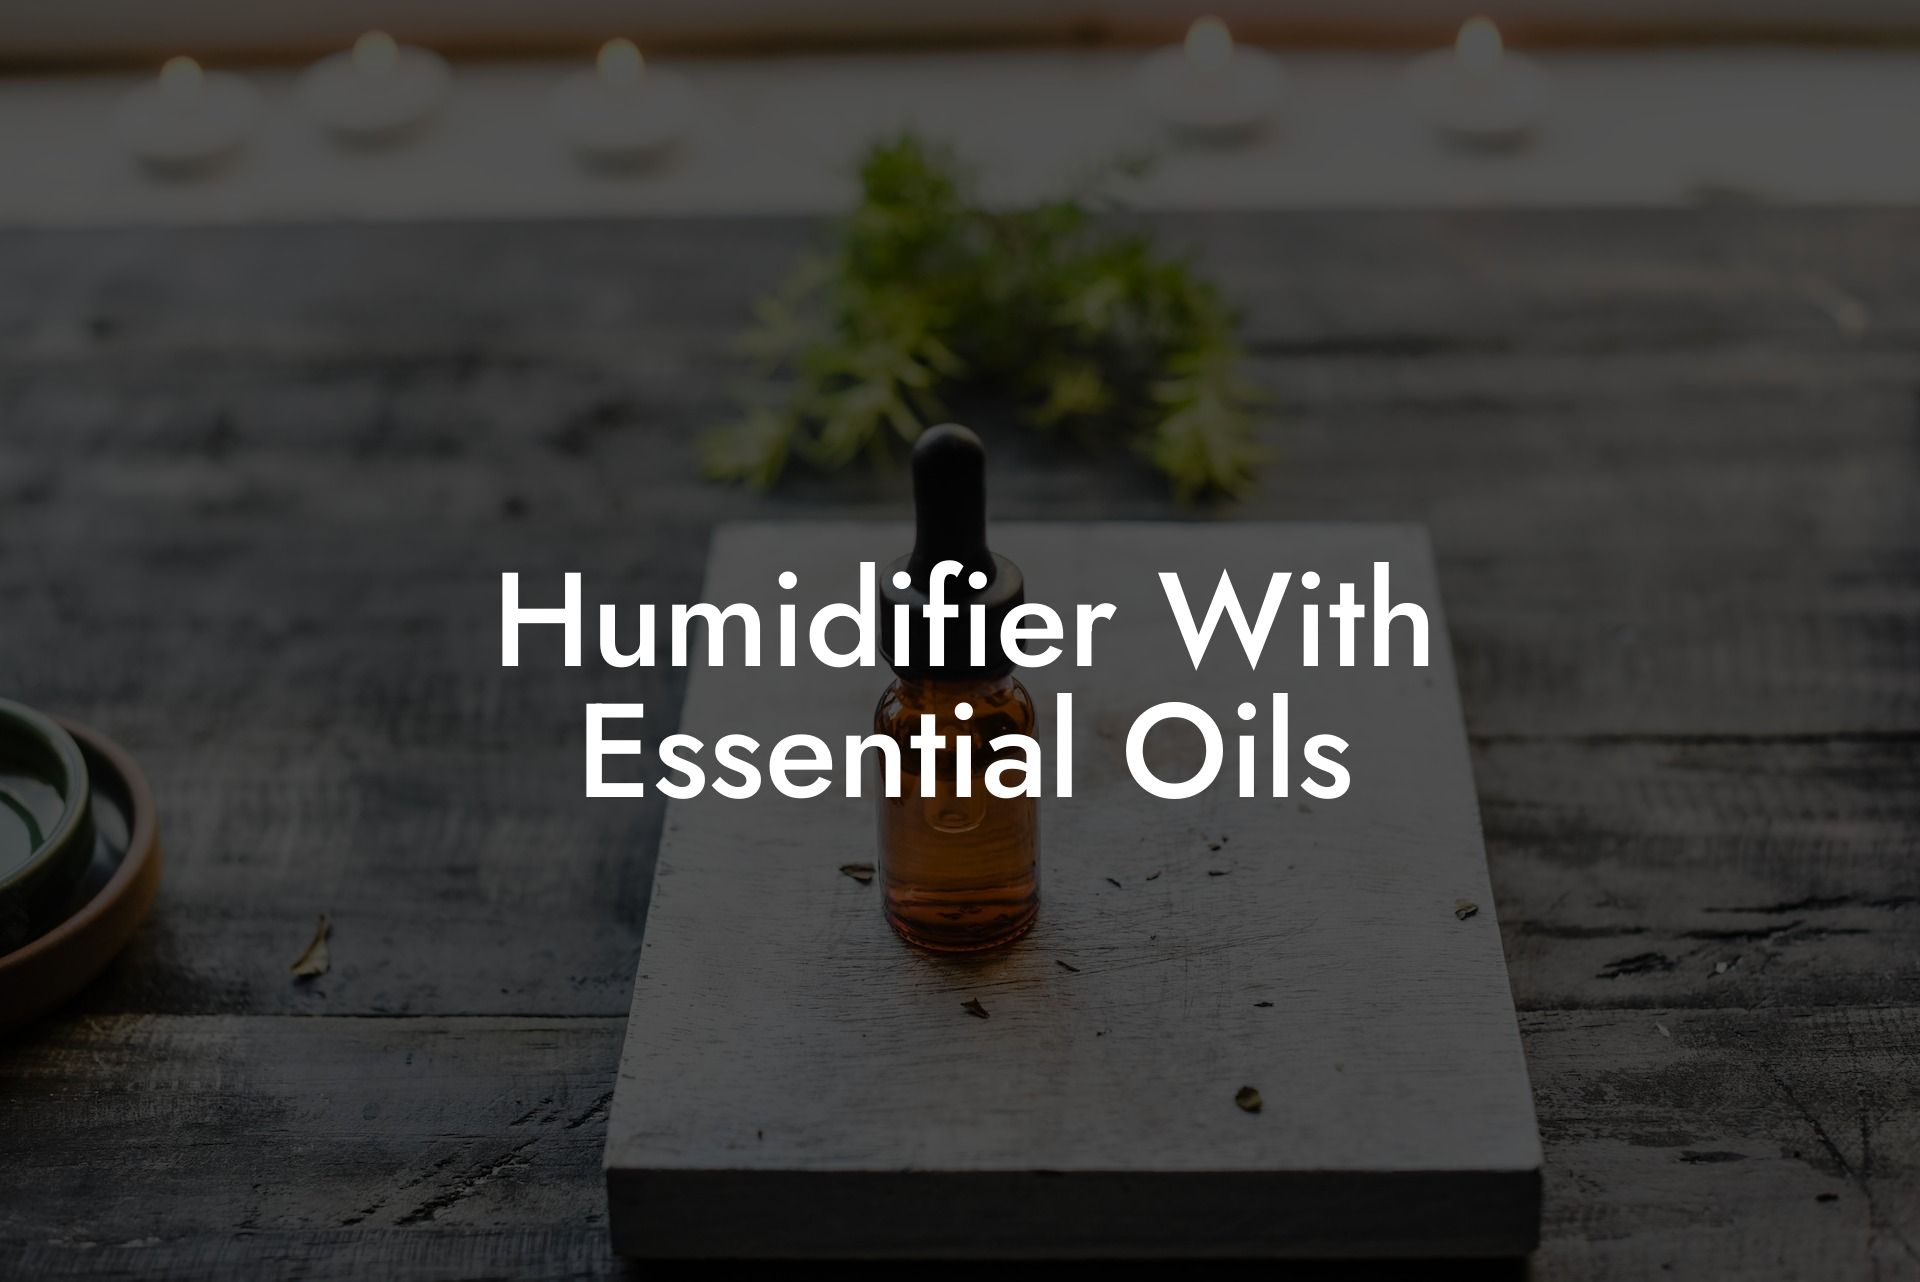 Humidifier With Essential Oils